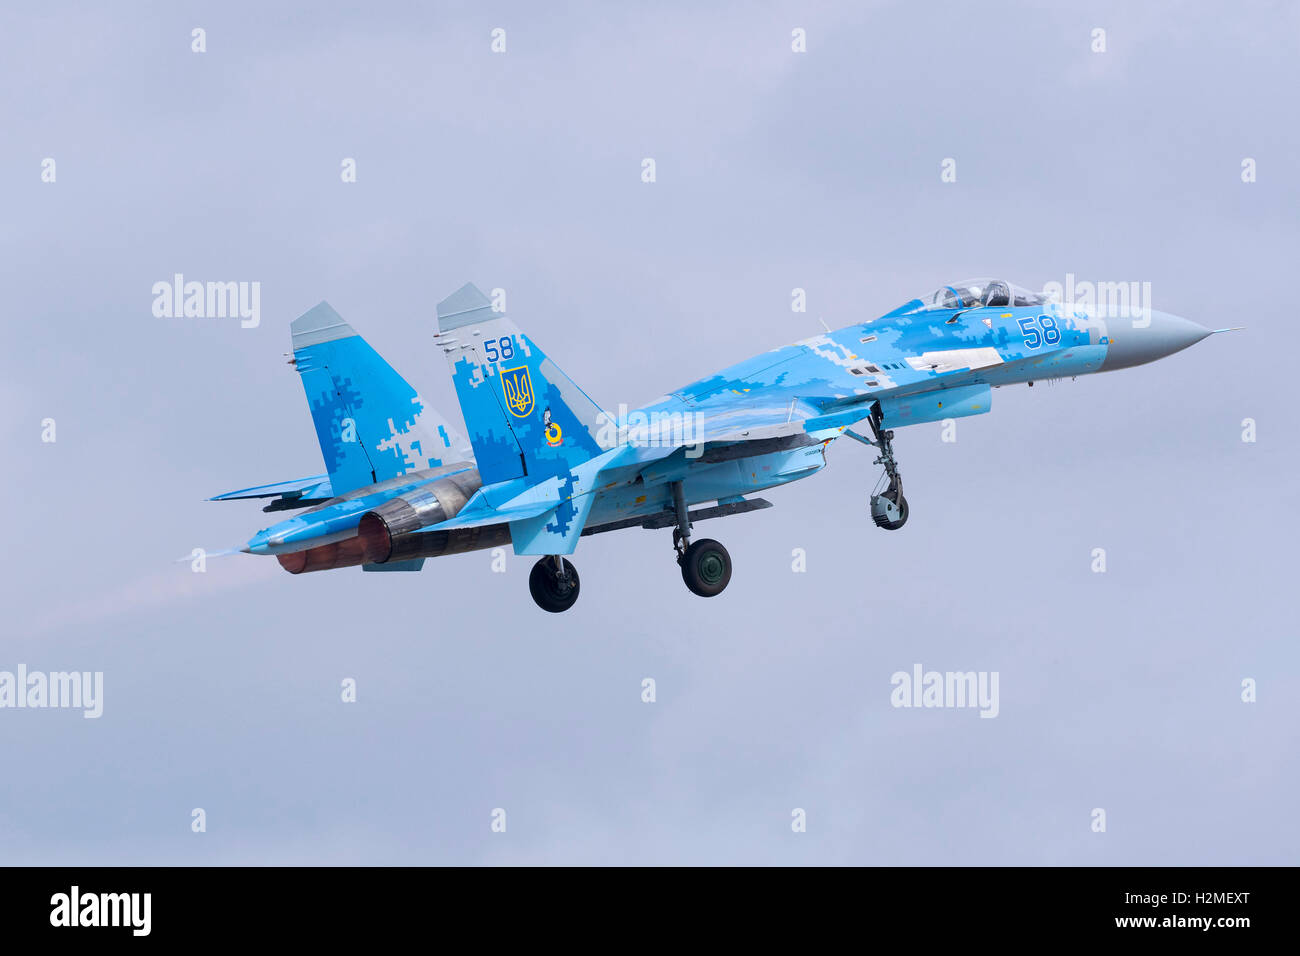 Two Ukrainian Air Force Sukhoi Su-27'departing together after the airshow is over. Stock Photo